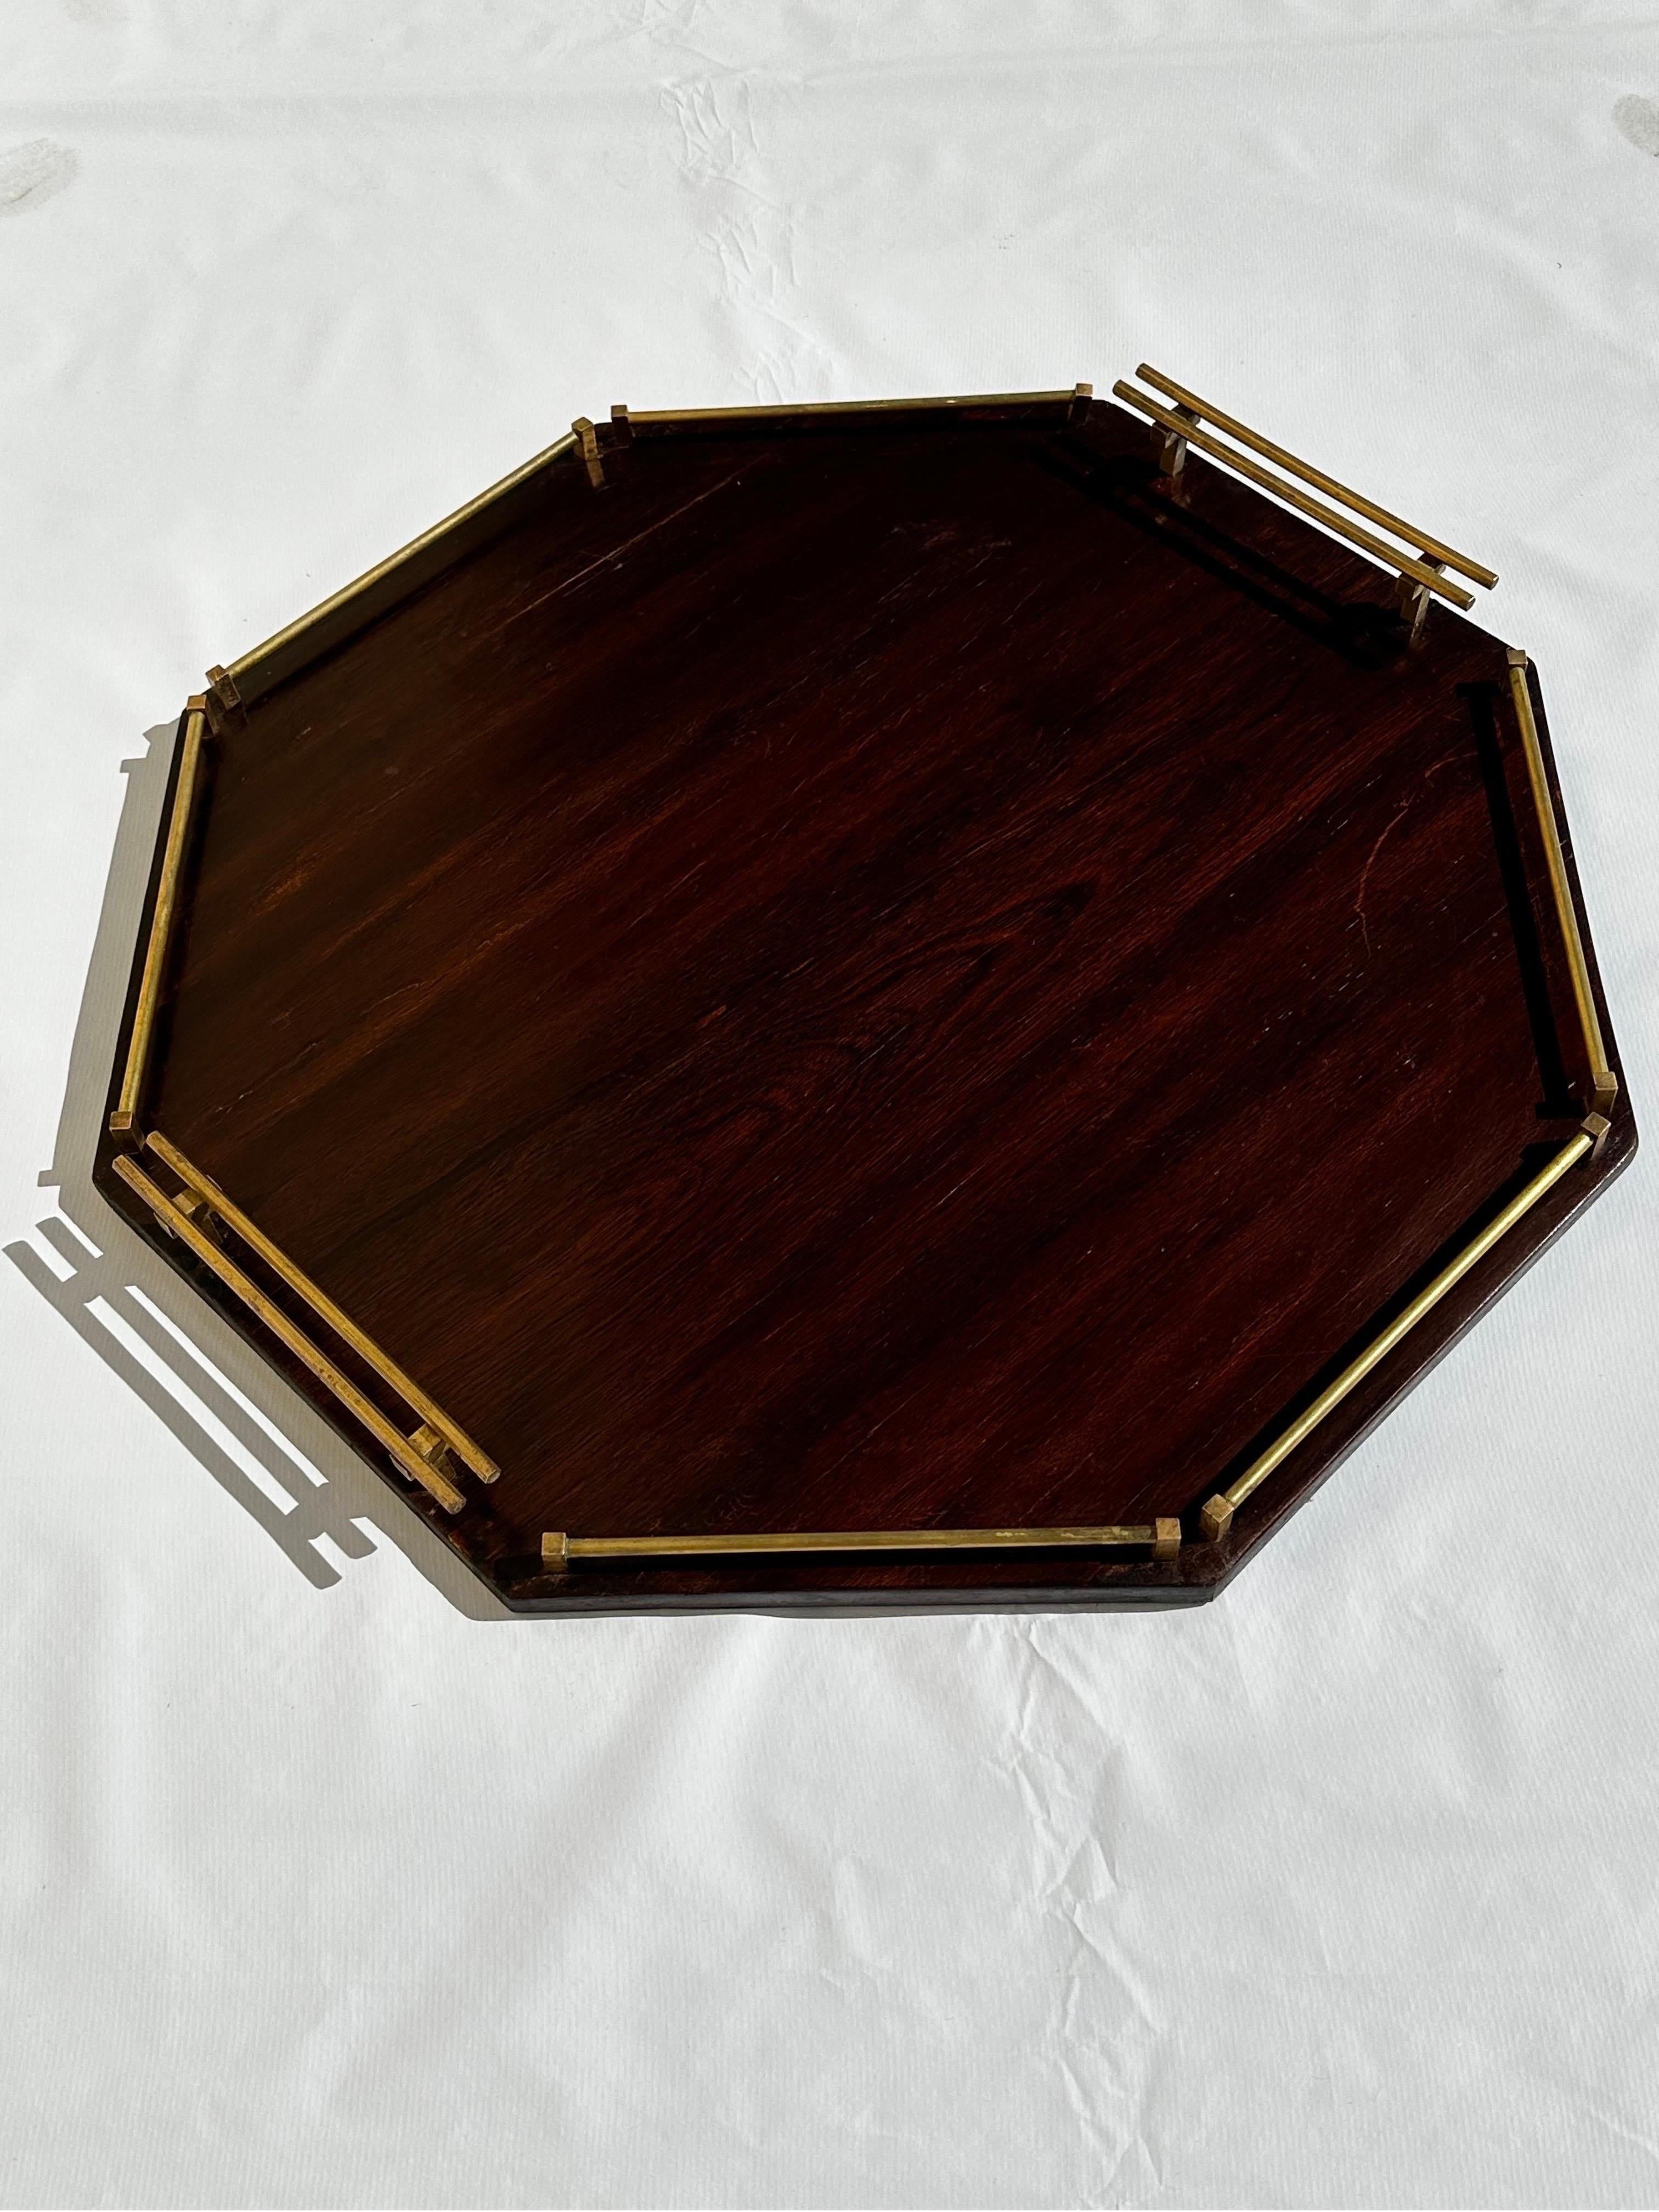 Brazilian Jacaranda Rosewood serving tray with brass handles and brass side stoppers from the 1960s. Although the designer is unknown, it resembles designs from the likes of Sergio Rodrigues, Jorge Zalszupin and Celina Decorações.